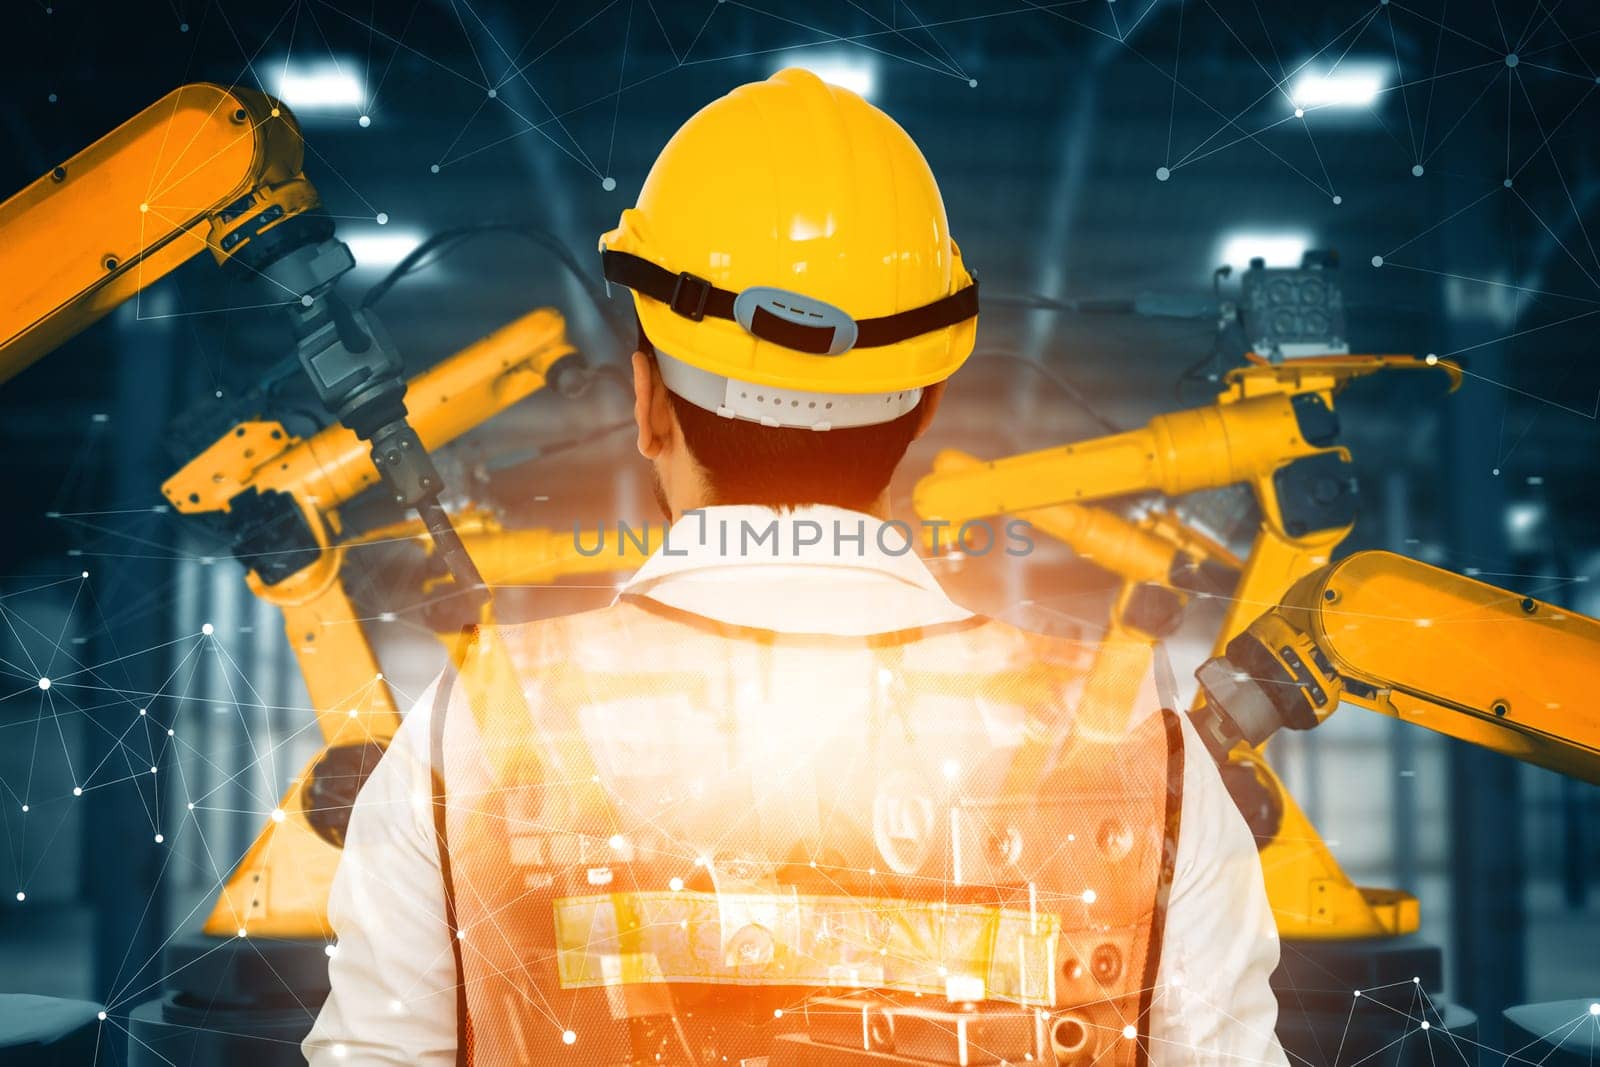 MLB Mechanized industry robot arm and factory worker double exposure by biancoblue